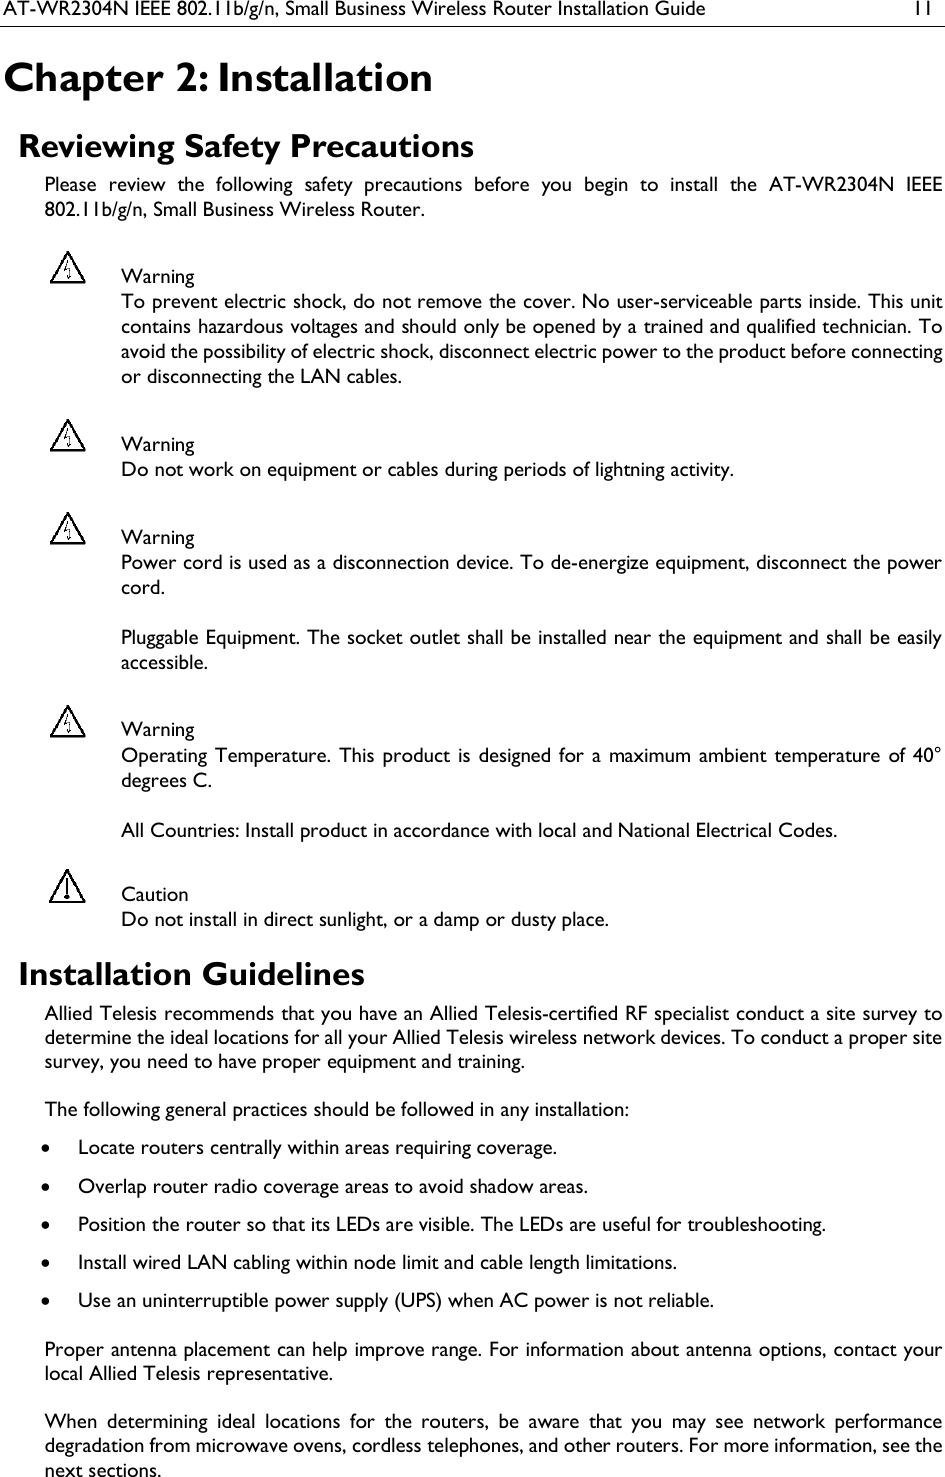 AT-WR2304N IEEE 802.11b/g/n, Small Business Wireless Router Installation Guide  11 Chapter 2: Installation Reviewing Safety Precautions Please  review  the  following  safety  precautions  before  you  begin  to  install  the  AT-WR2304N  IEEE 802.11b/g/n, Small Business Wireless Router.   Warning To prevent electric shock, do not remove the cover. No user-serviceable parts inside. This unit contains hazardous voltages and should only be opened by a trained and qualified technician. To avoid the possibility of electric shock, disconnect electric power to the product before connecting or disconnecting the LAN cables.  Warning Do not work on equipment or cables during periods of lightning activity.  Warning Power cord is used as a disconnection device. To de-energize equipment, disconnect the power cord.  Pluggable Equipment. The socket outlet shall be installed near the equipment and shall be easily accessible.  Warning Operating Temperature. This product is designed for a maximum ambient temperature of 40° degrees C.  All Countries: Install product in accordance with local and National Electrical Codes.  Caution Do not install in direct sunlight, or a damp or dusty place. Installation Guidelines Allied Telesis recommends that you have an Allied Telesis-certified RF specialist conduct a site survey to determine the ideal locations for all your Allied Telesis wireless network devices. To conduct a proper site survey, you need to have proper equipment and training.  The following general practices should be followed in any installation:  Locate routers centrally within areas requiring coverage.  Overlap router radio coverage areas to avoid shadow areas.  Position the router so that its LEDs are visible. The LEDs are useful for troubleshooting.  Install wired LAN cabling within node limit and cable length limitations.  Use an uninterruptible power supply (UPS) when AC power is not reliable.   Proper antenna placement can help improve range. For information about antenna options, contact your local Allied Telesis representative.   When  determining  ideal  locations  for  the  routers,  be  aware  that  you  may  see  network  performance degradation from microwave ovens, cordless telephones, and other routers. For more information, see the next sections. 